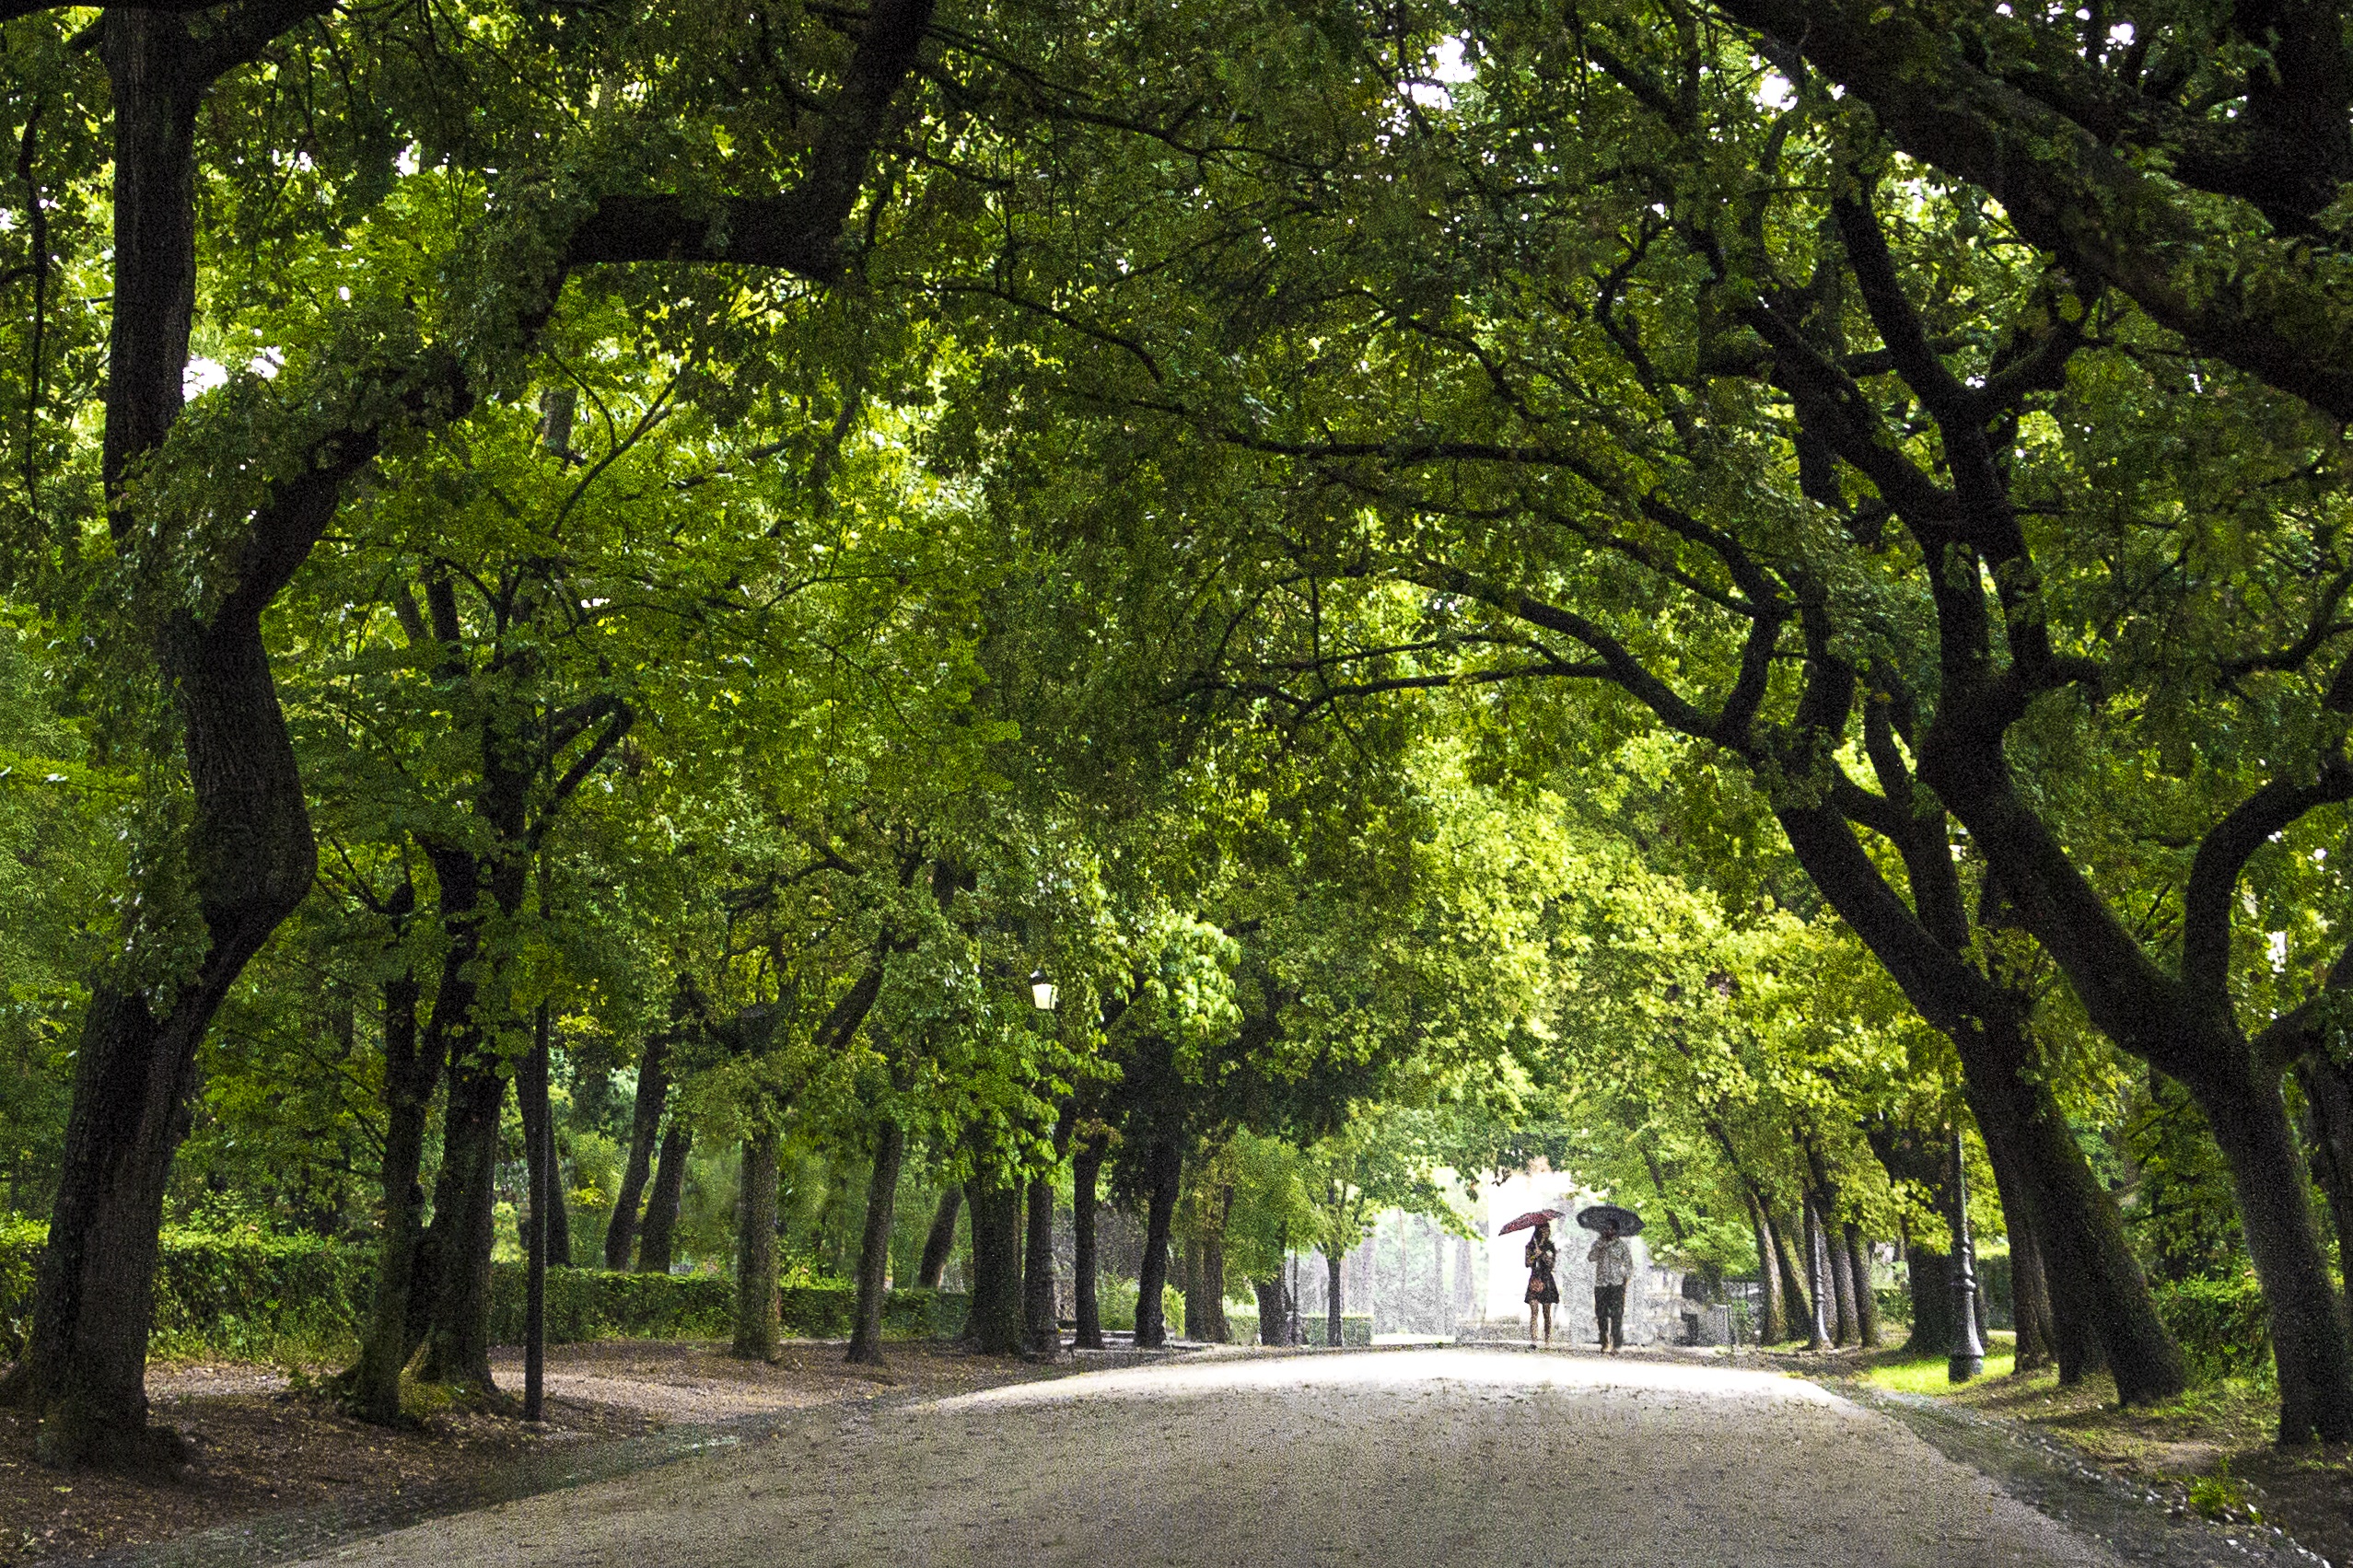 a pair walking down a tree-covered lane